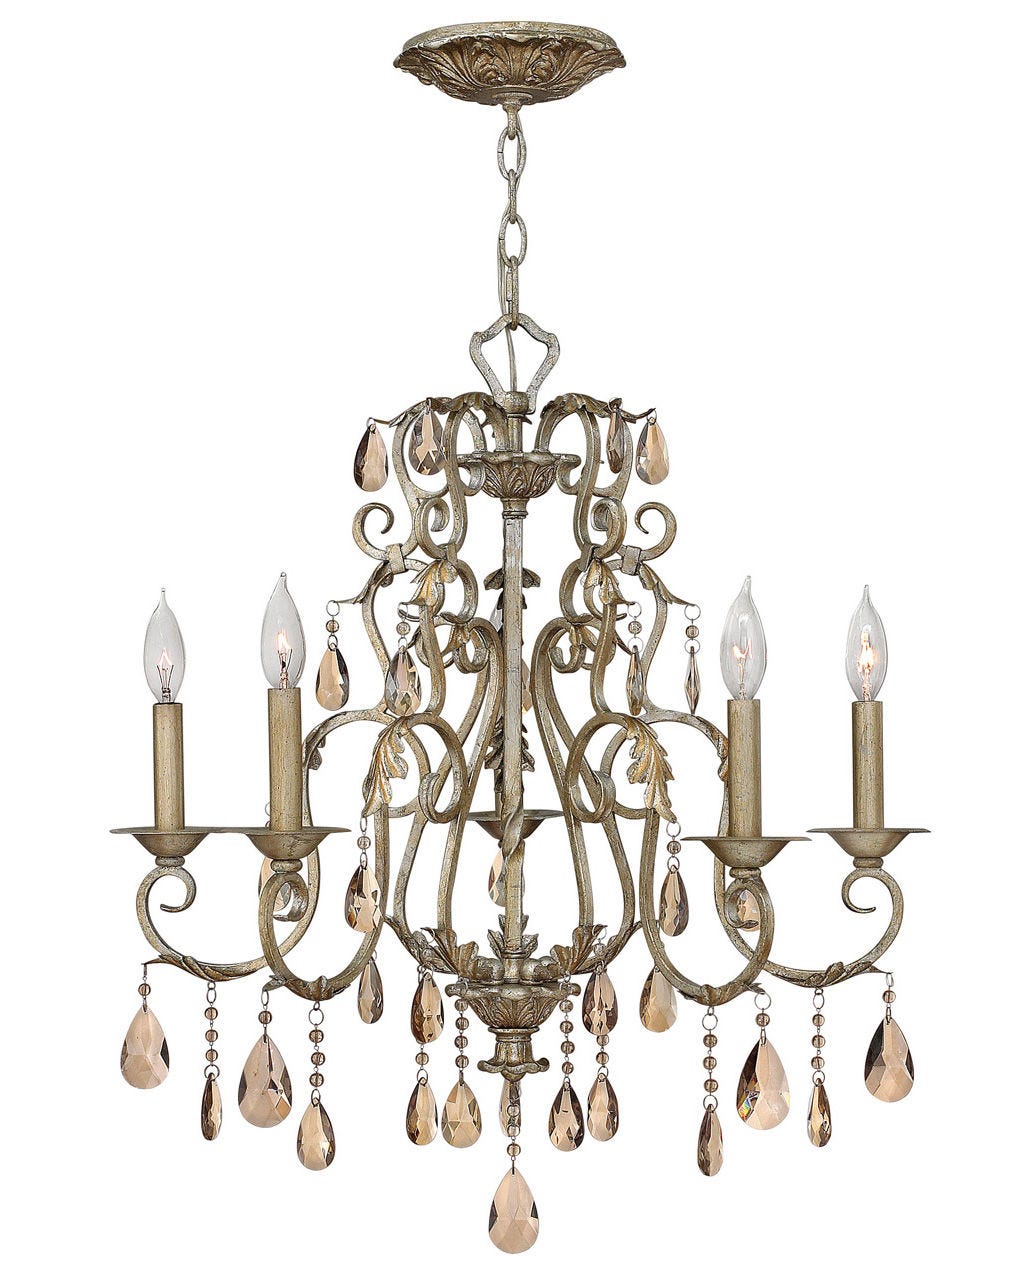 Hinkley Carlton Chandelier Collection